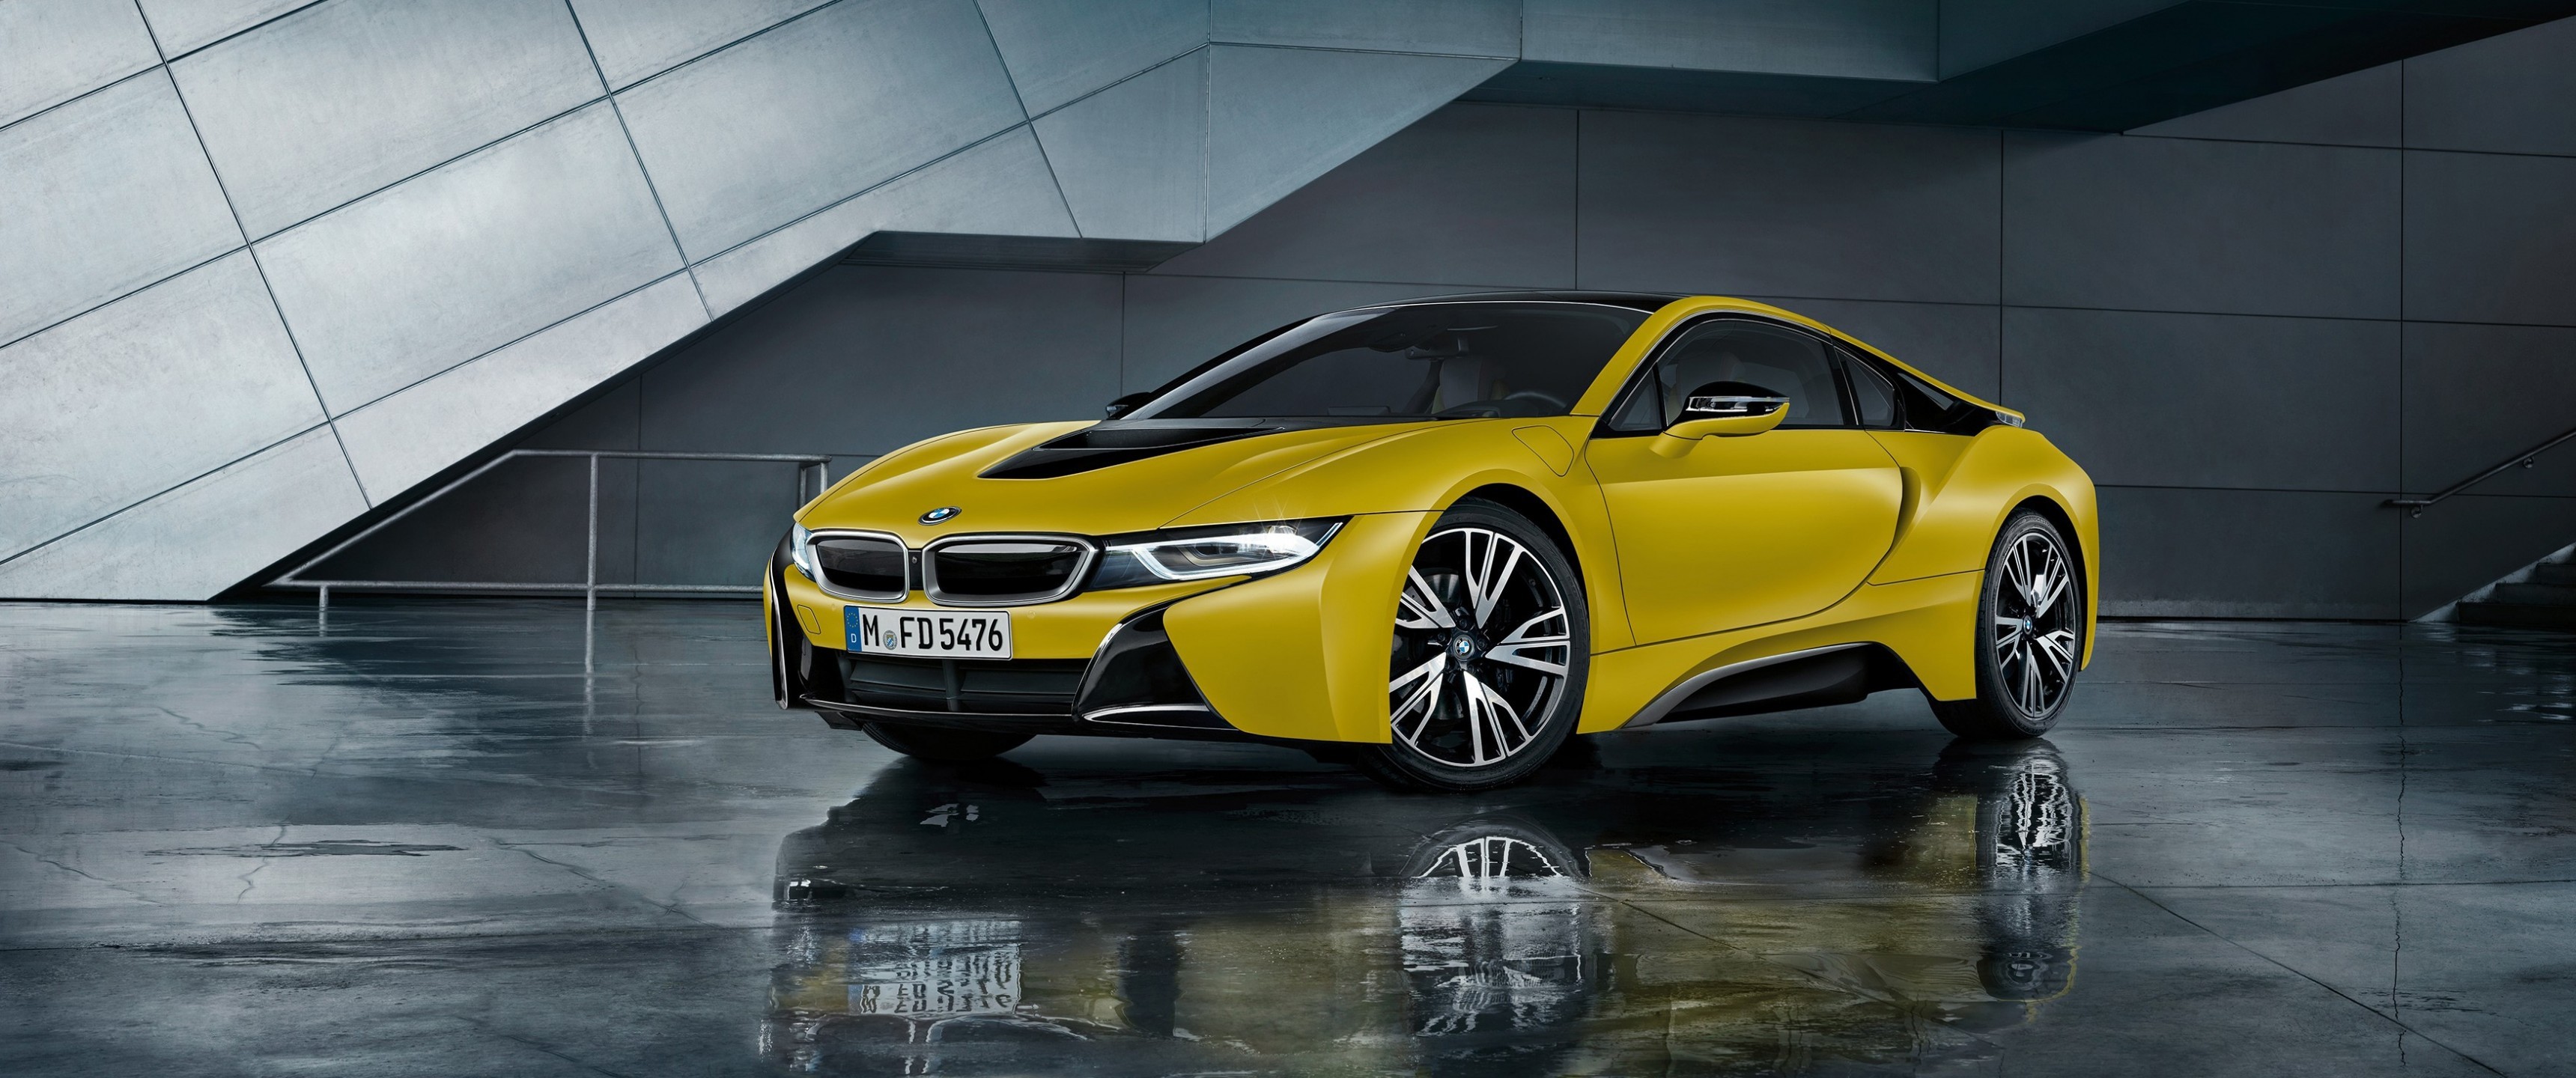 Bmw I8, Yellow, Side View, Supercar, Cars - Bmw I8 Roadster Limited Edition - HD Wallpaper 